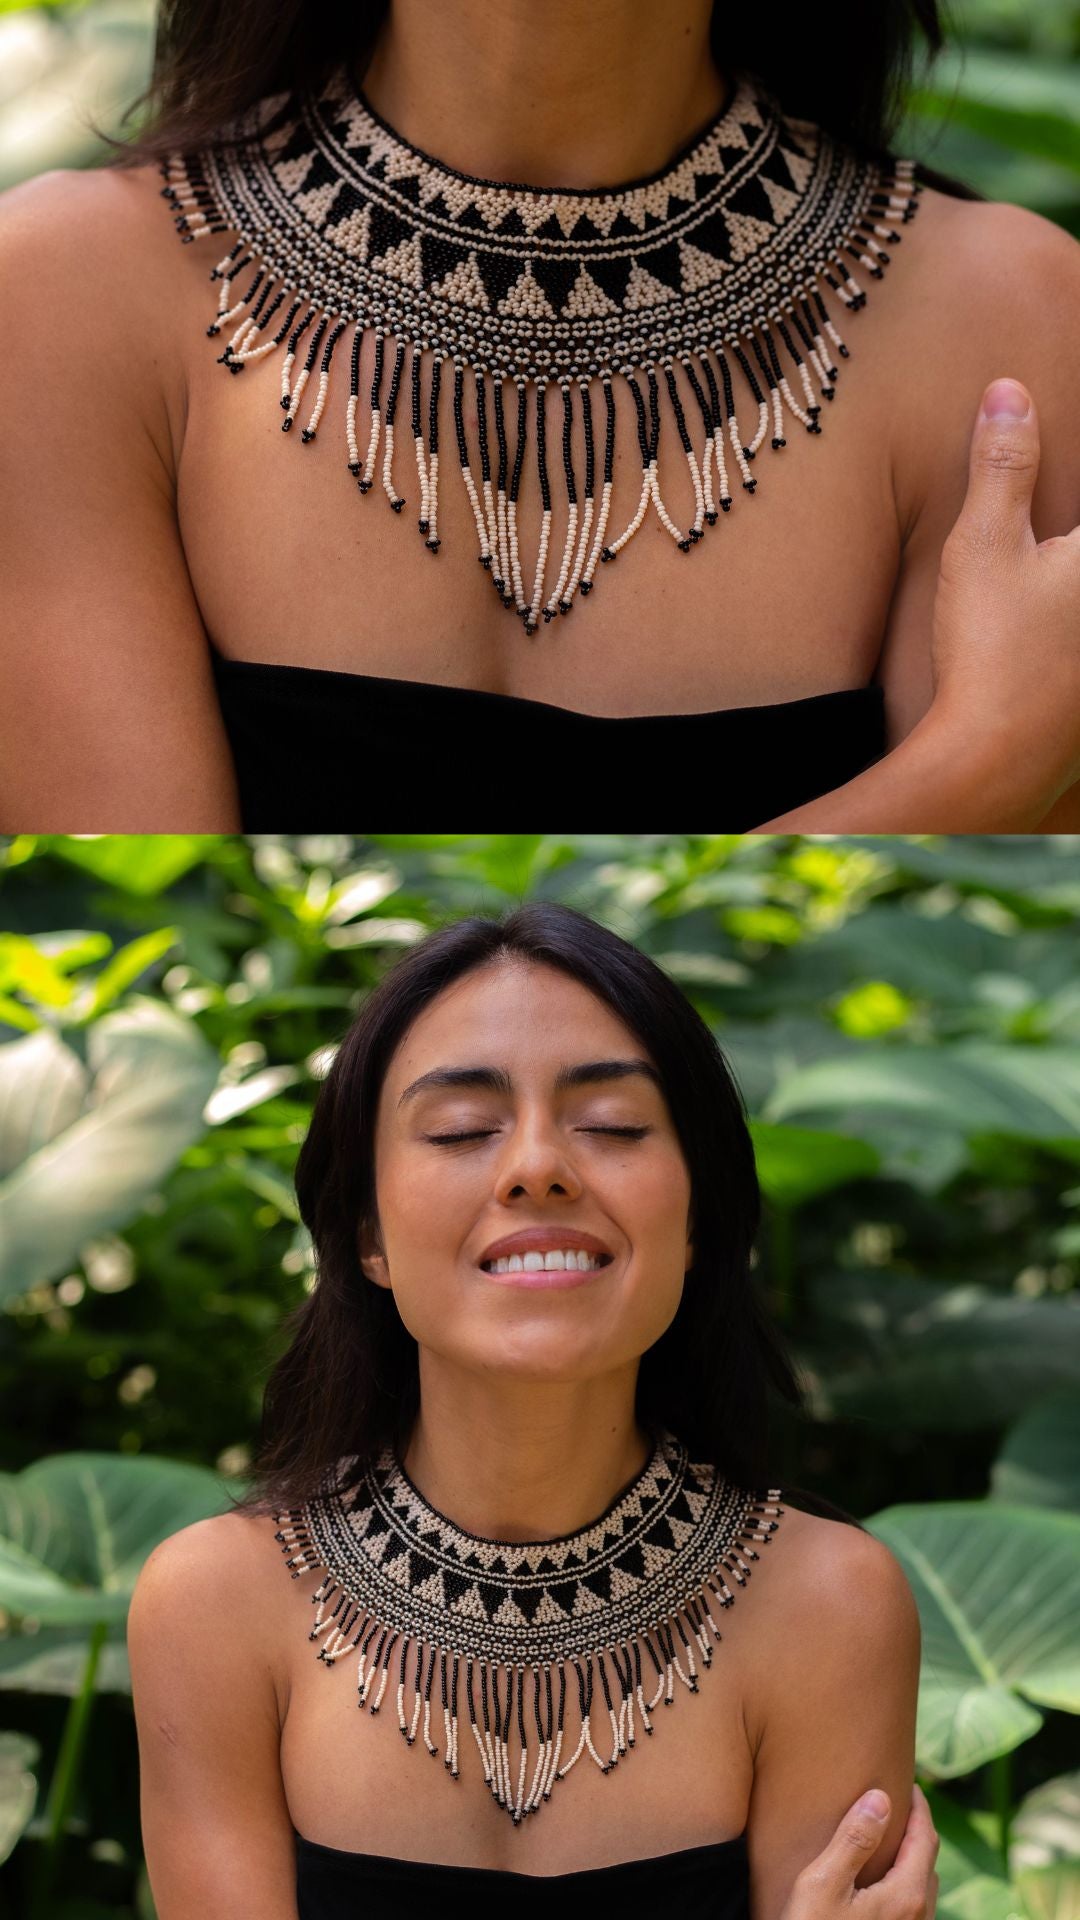 Unique high-quality handmade bead necklaces by Mother Sierra